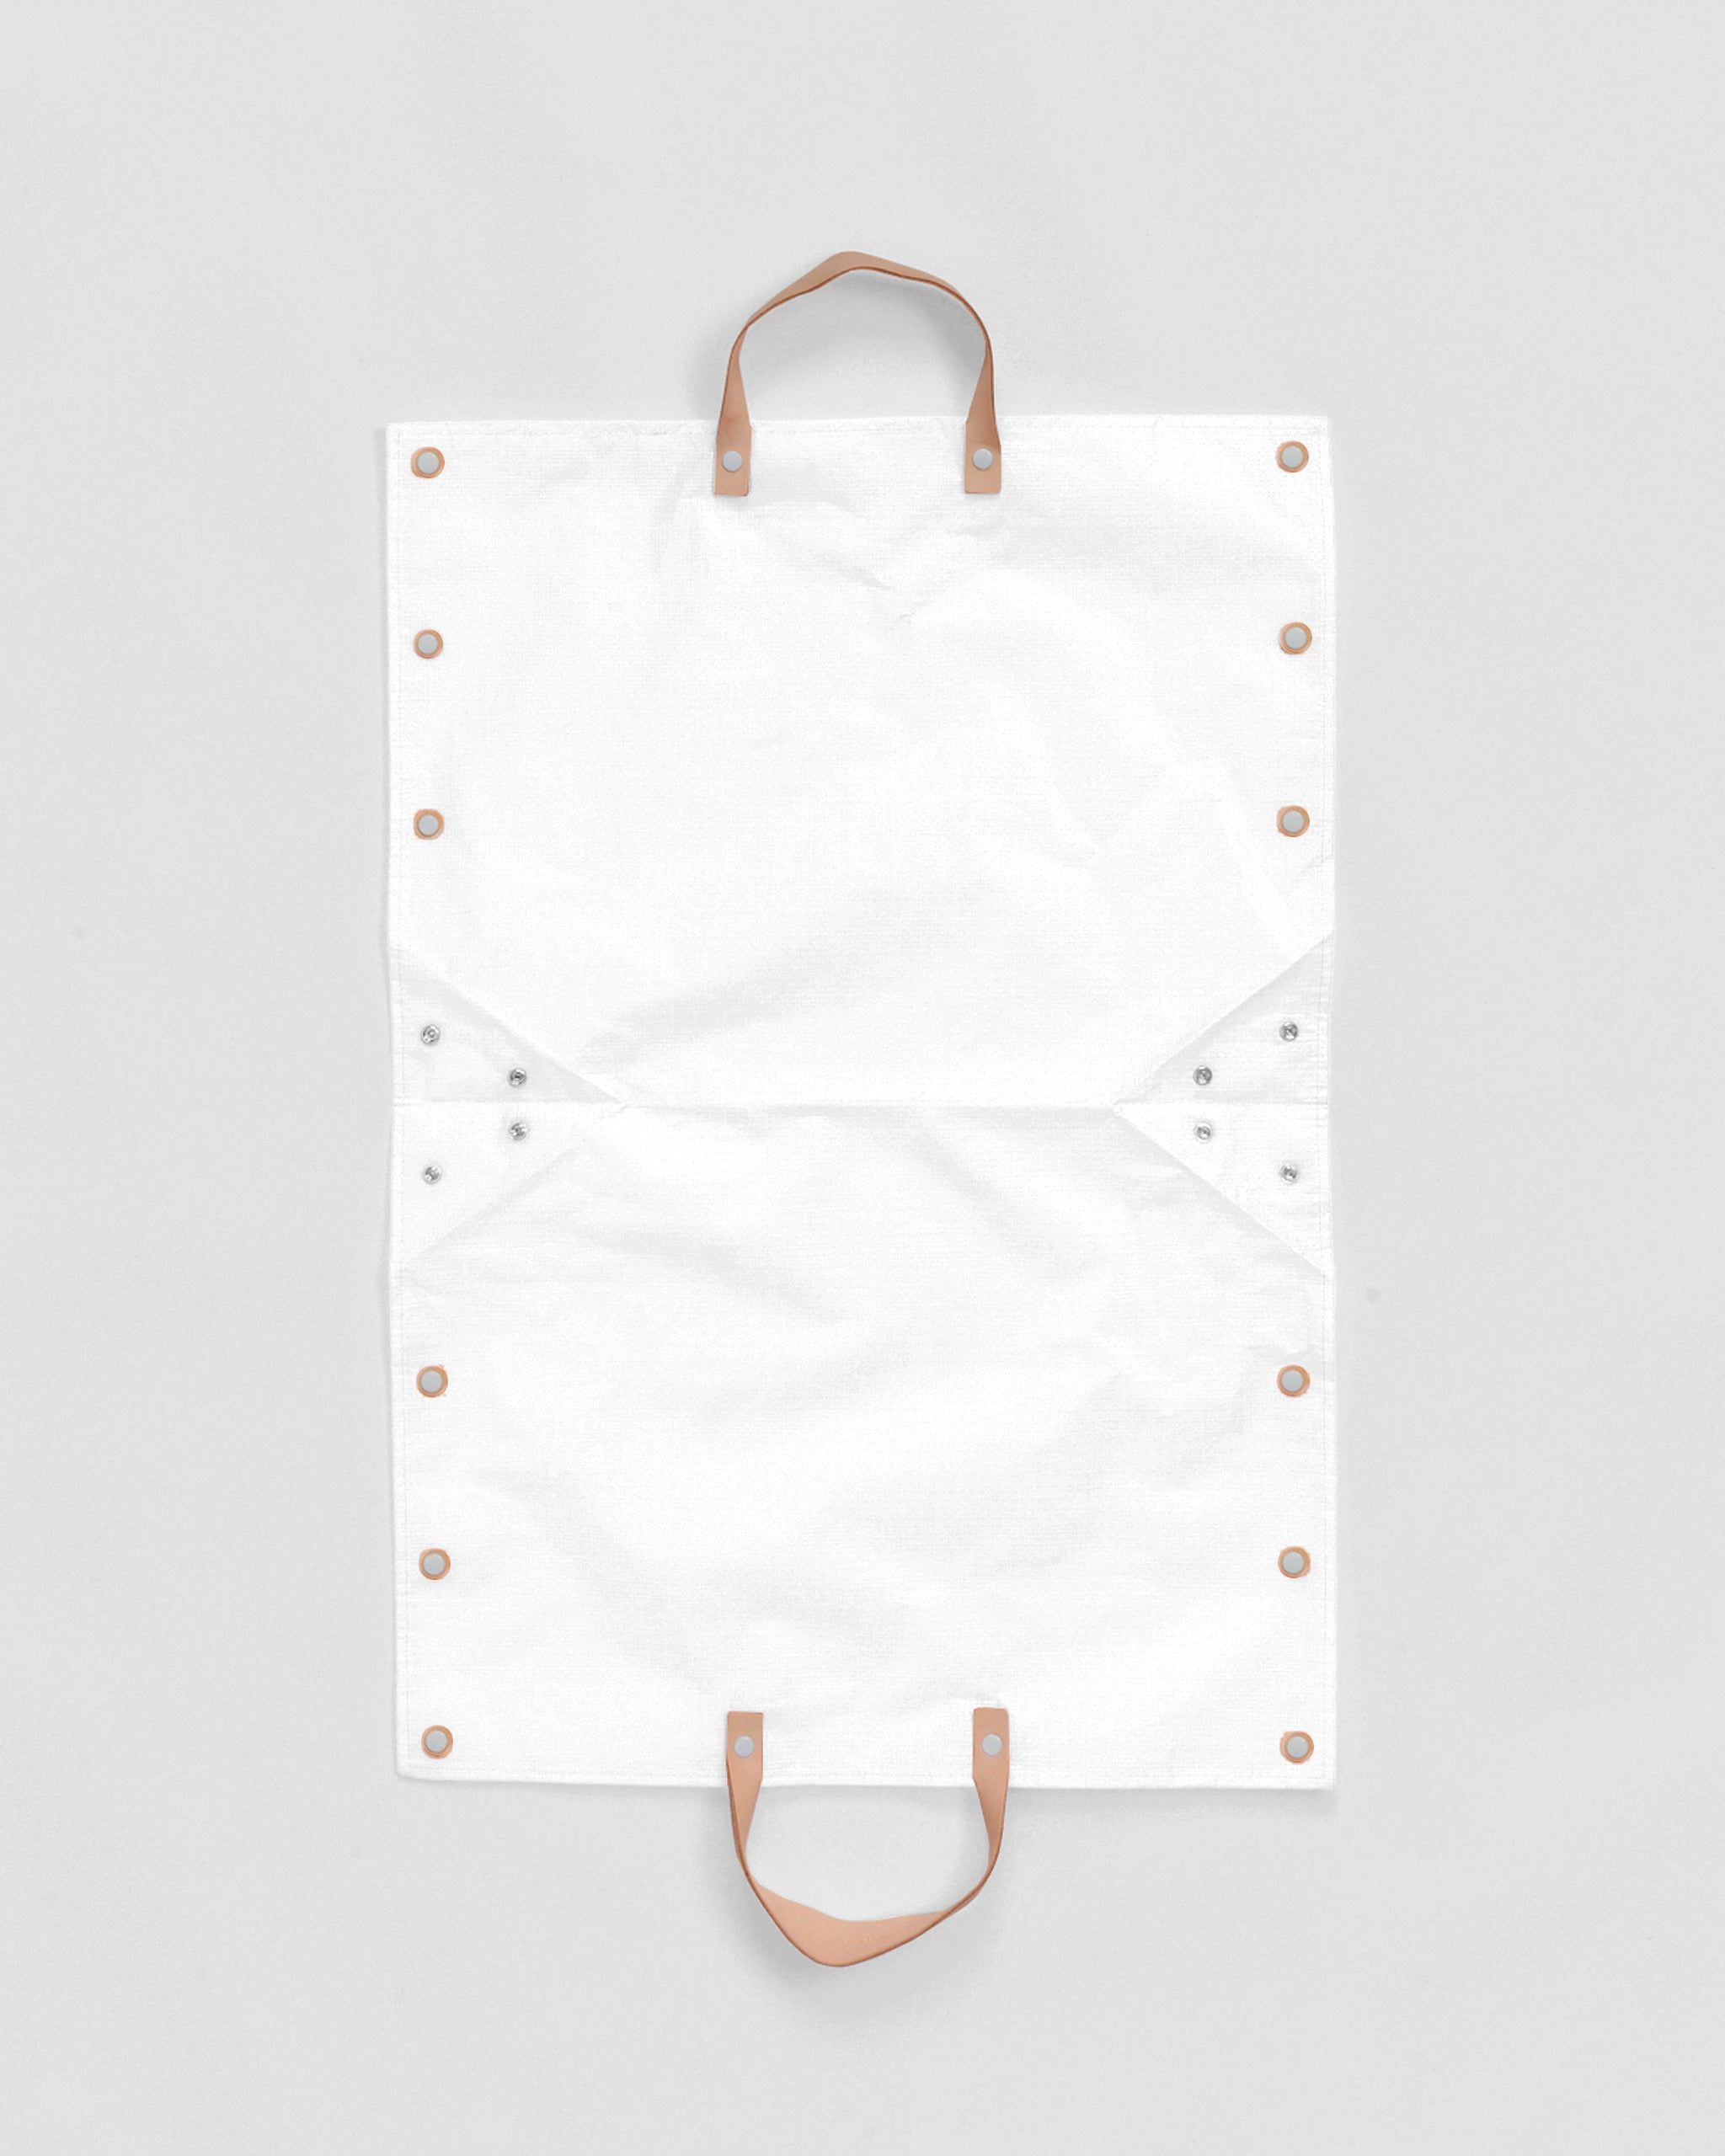 Flat image of an open Hender Scheme picnic bag for couple.